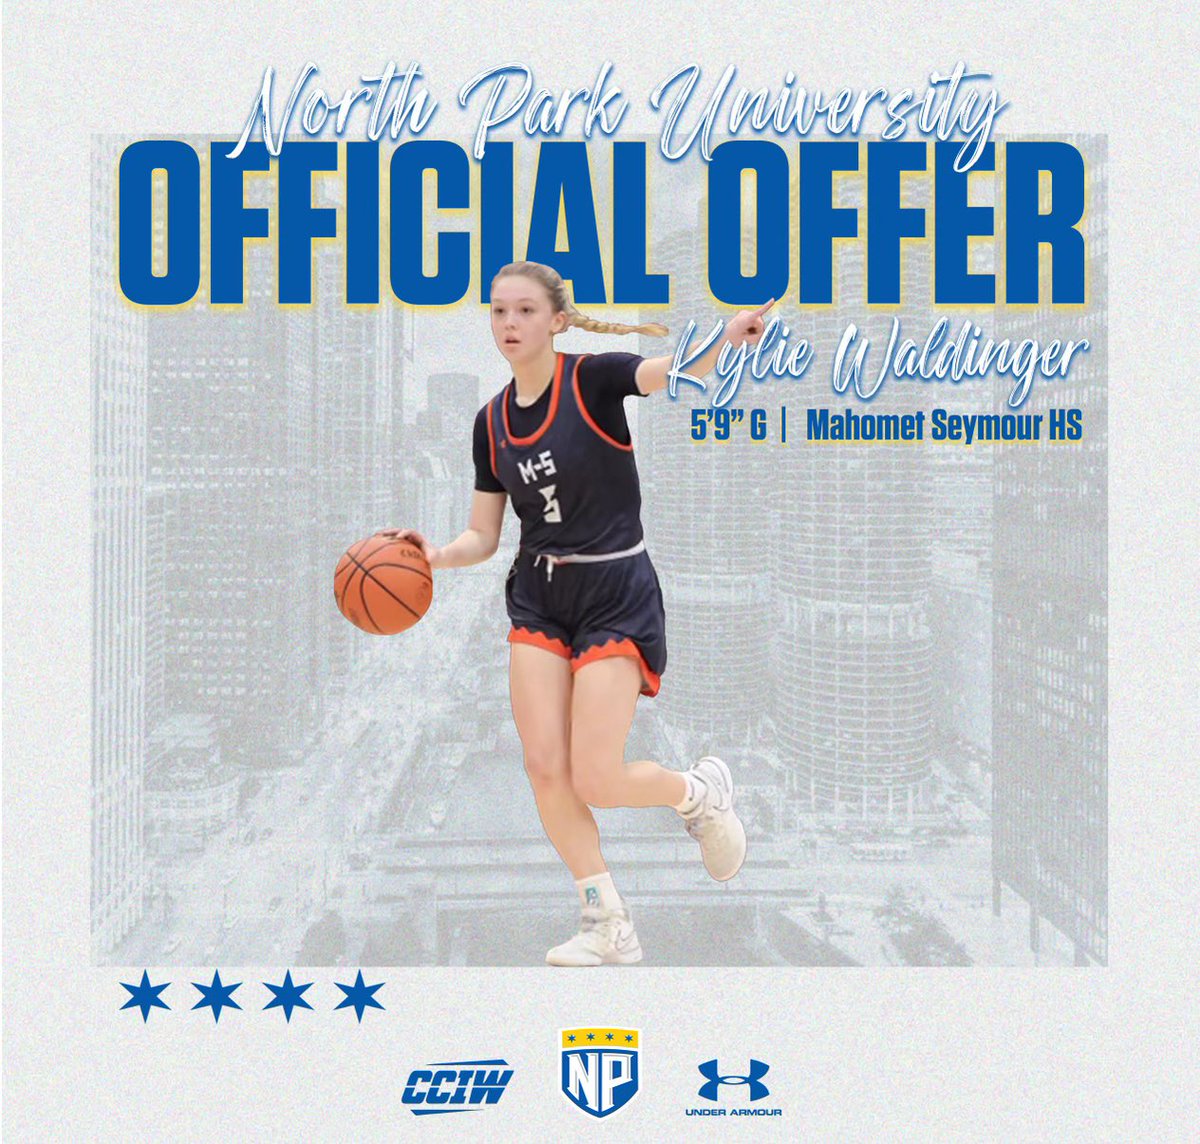 After a great morning touring faculties and talking with coaches, I am so grateful to receive an official offer from North Park! 💙💛 @NPU_womenshoops Thank you!!!  @AnnieShain